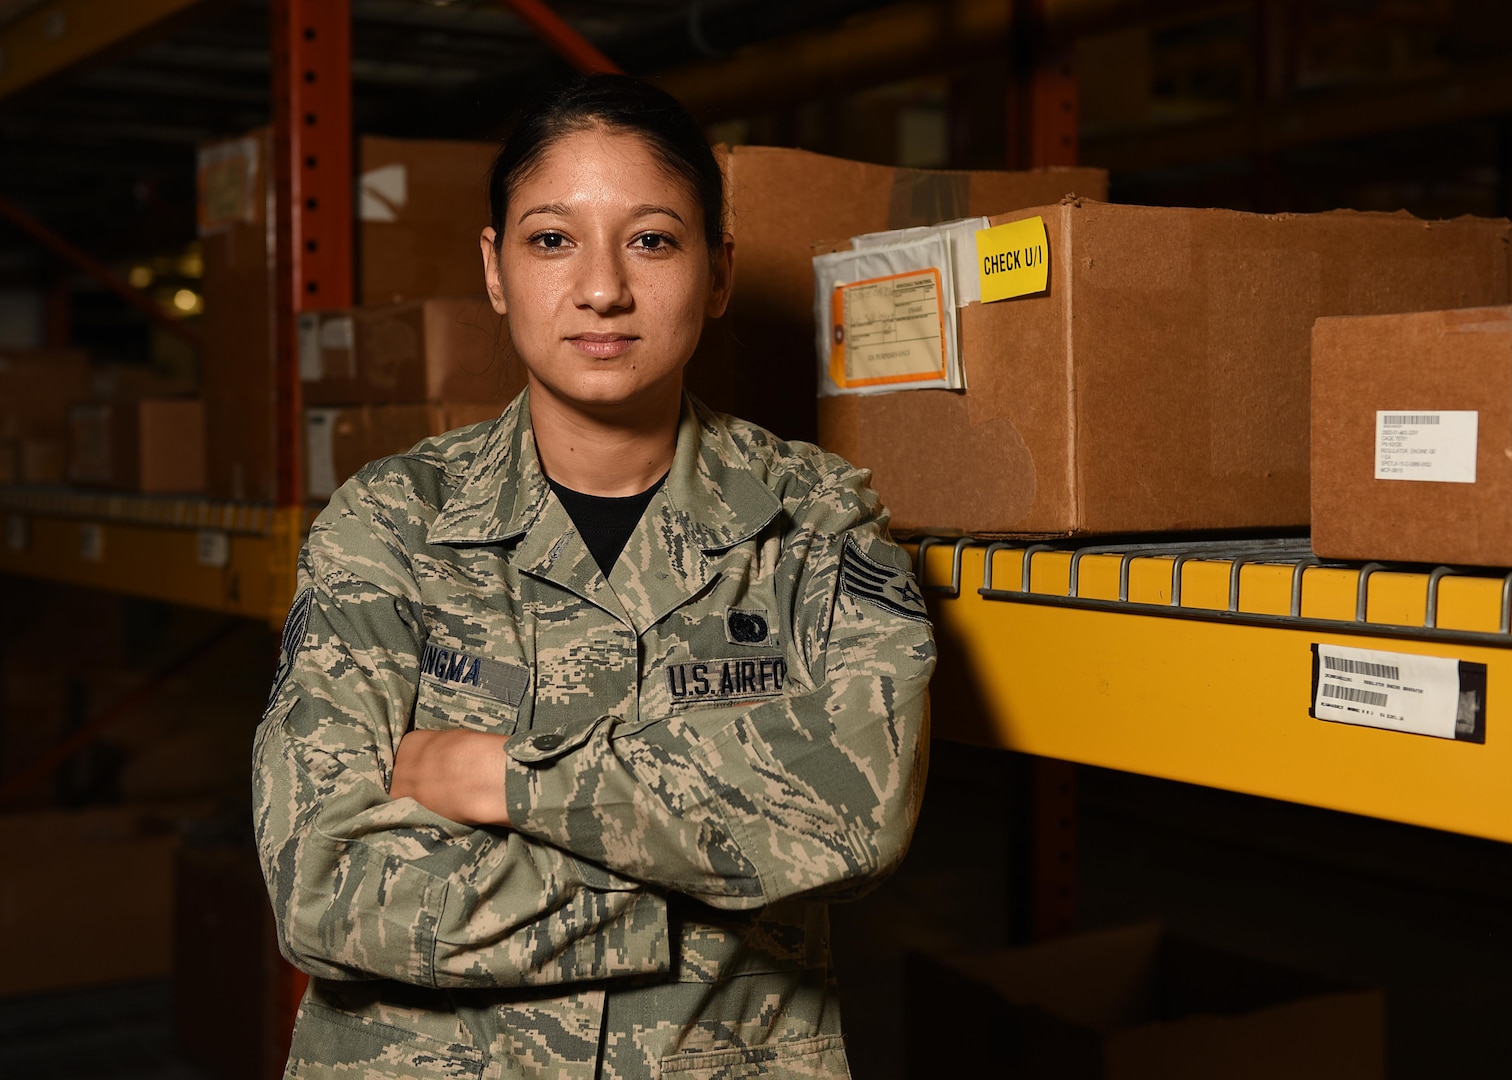 Female staff sergeant poses in front boxes with her arms crossed.